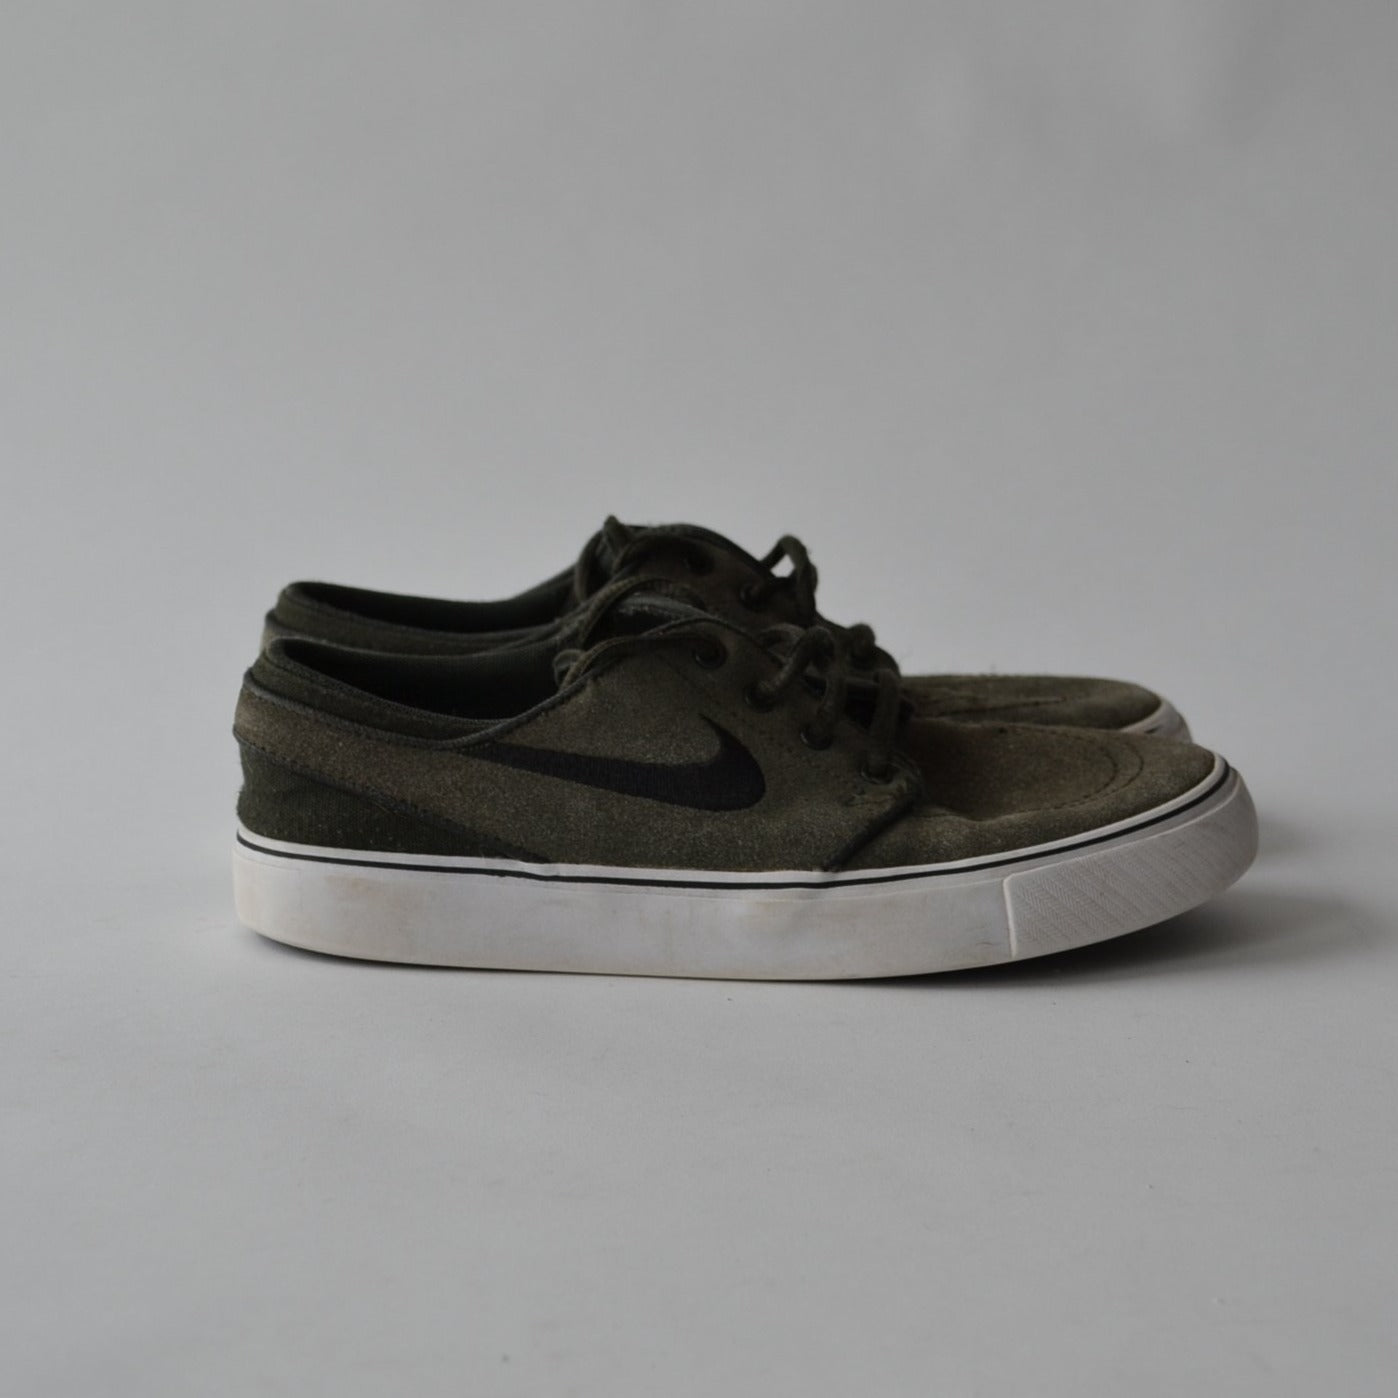 NIKE Khaki Green Suede Style Trainers Shoe Size 3.5